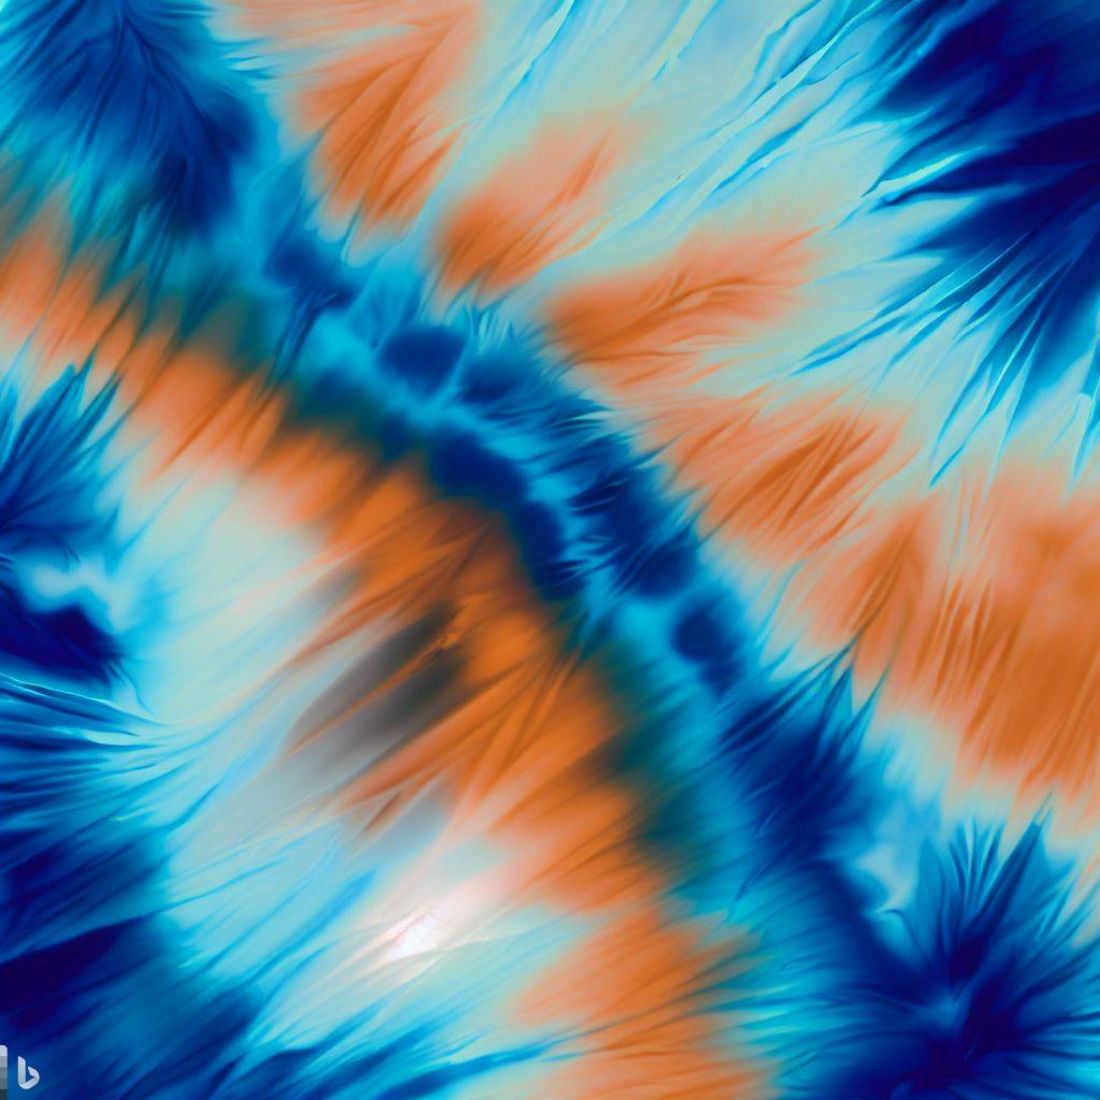 4 Tie dye psychedelic background images in the colour combination